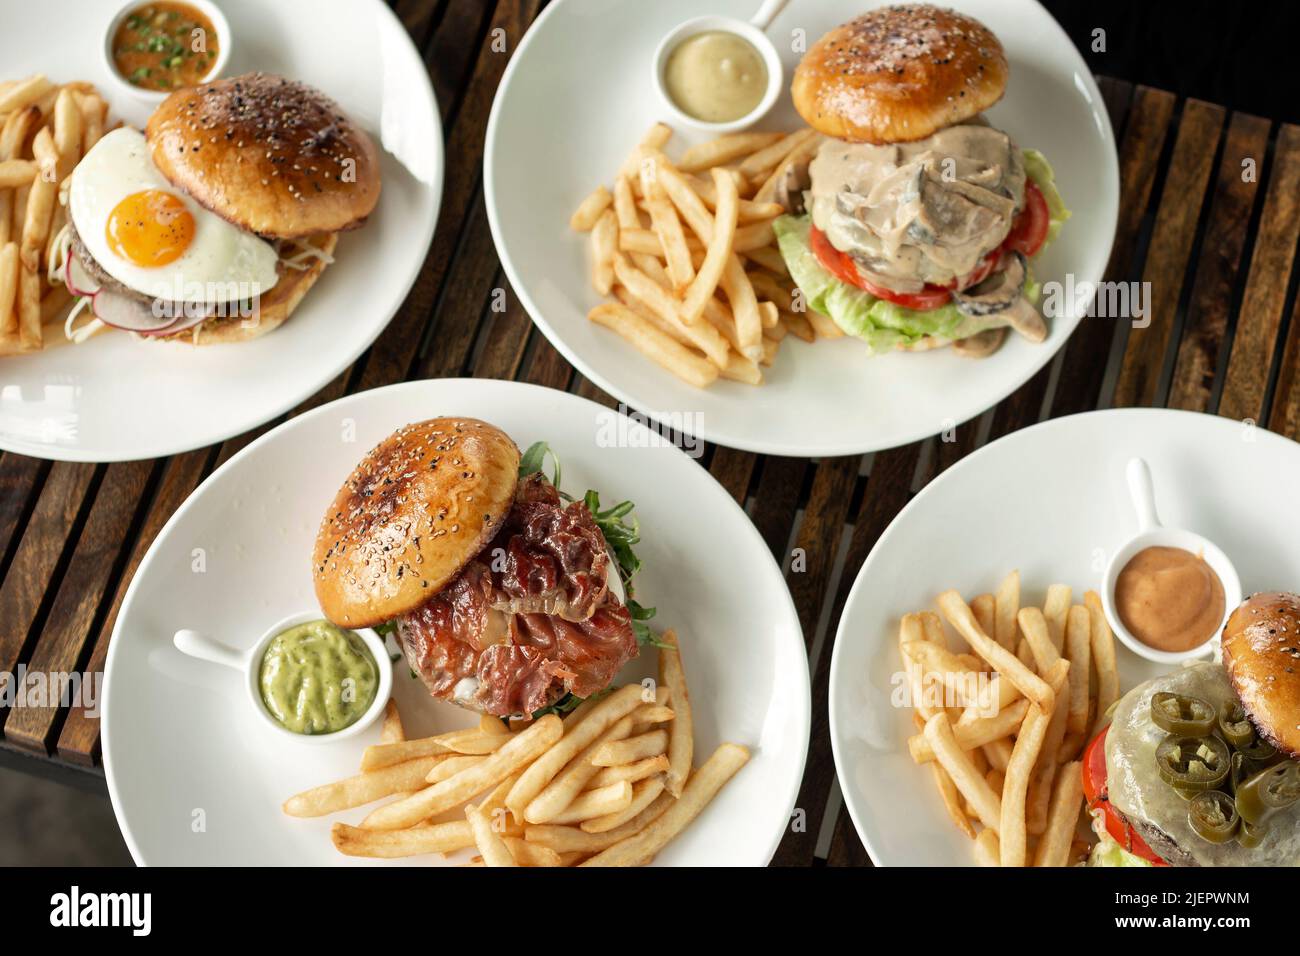 many different burgers on restaurant table Stock Photo